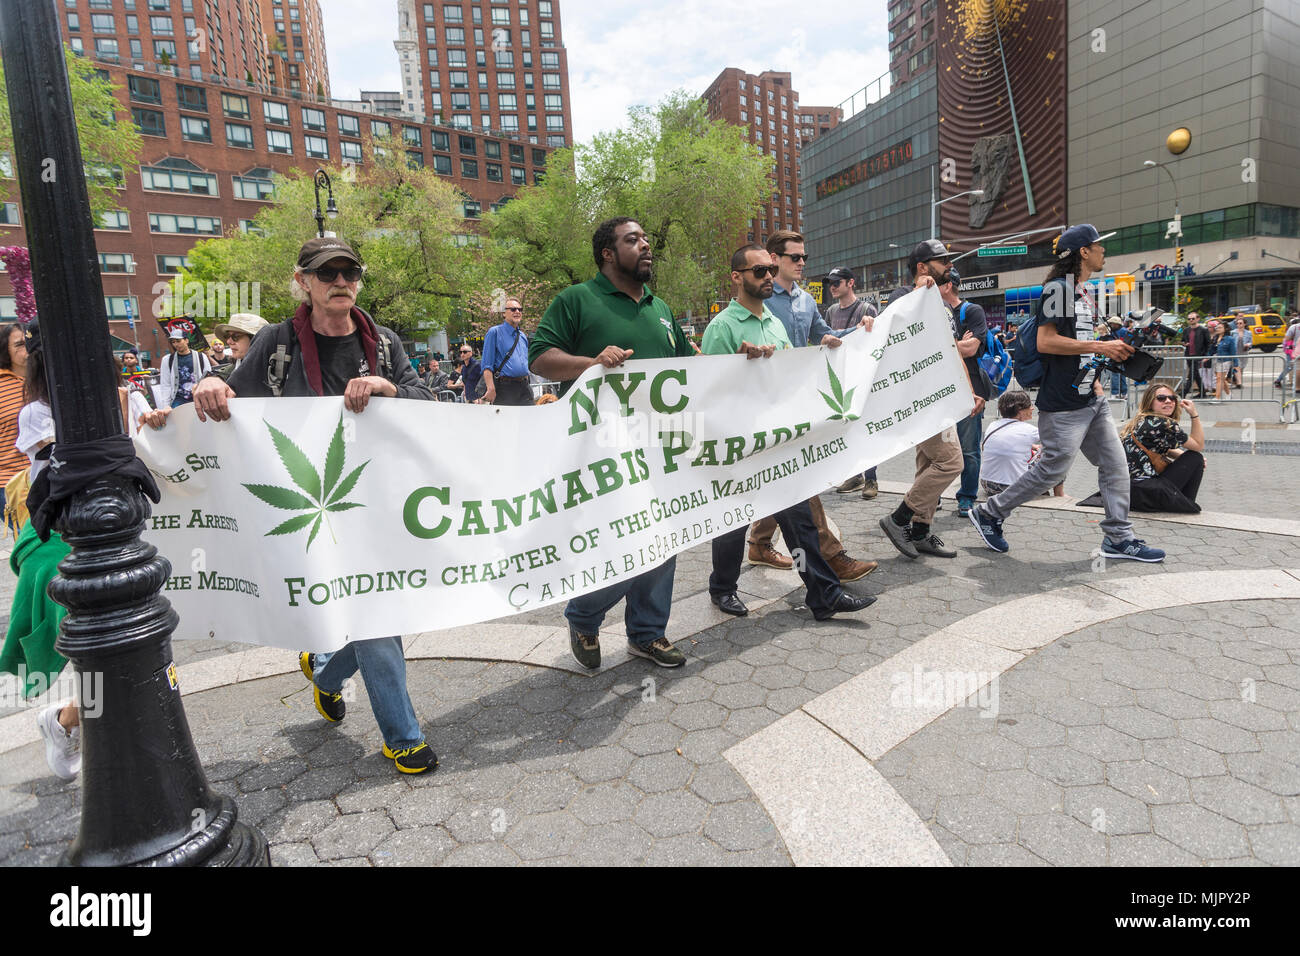 New York, NY, USA - 5 May 2018 - Million Marijuana March Cannabis Parade arrives in Union Square. Pot activists marched down Broadway from  Greeley Square to Union Square calling on New York State lawmakers to legalize marijuana for recreational use. CREDIT ©Stacy Walsh Rosenstock/Alamy Live News Stock Photo